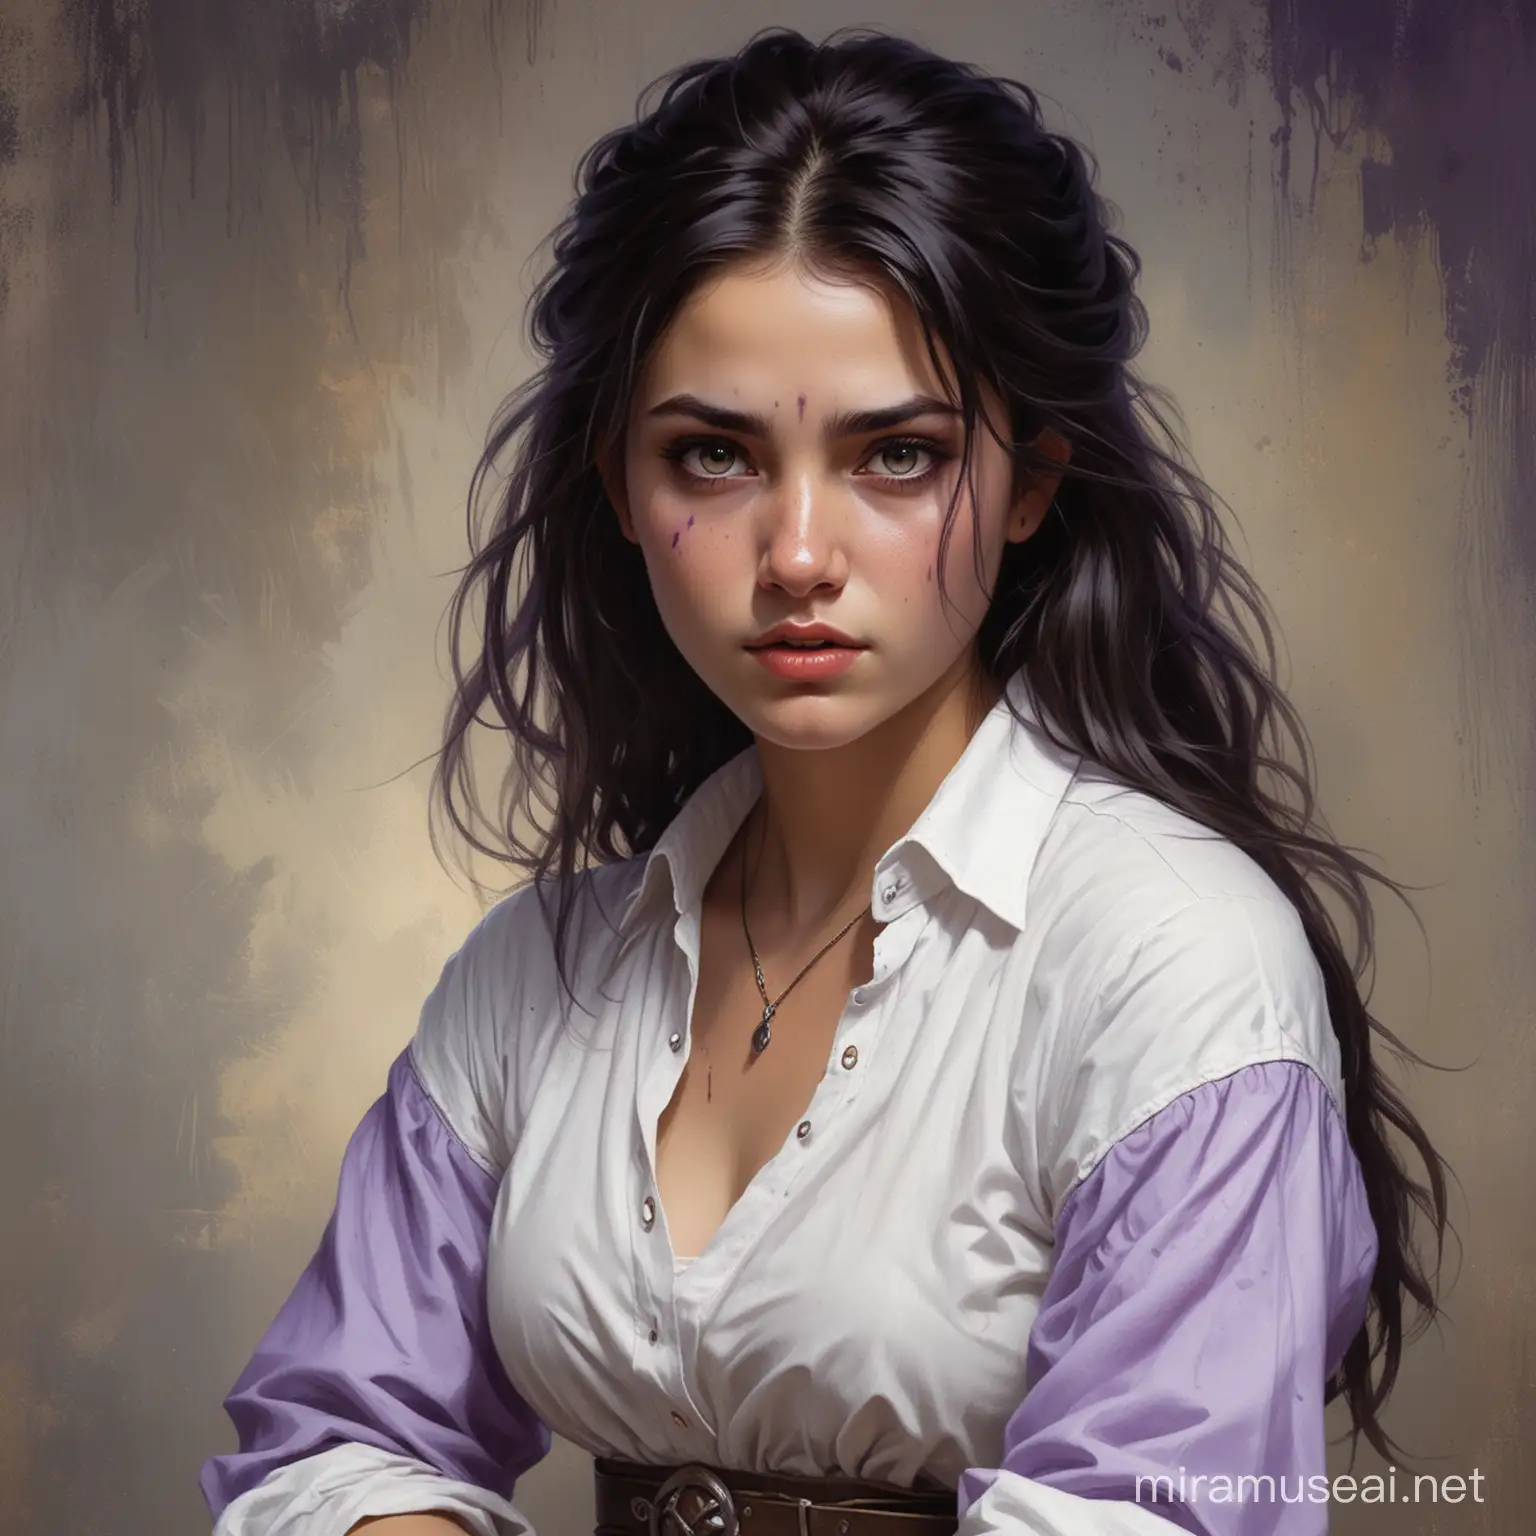 feisty young herder girl with an attitude, dark hair middle parted medium, white shirt. A purple birthmark over left eye, Medieval fantasy painting, MtG art